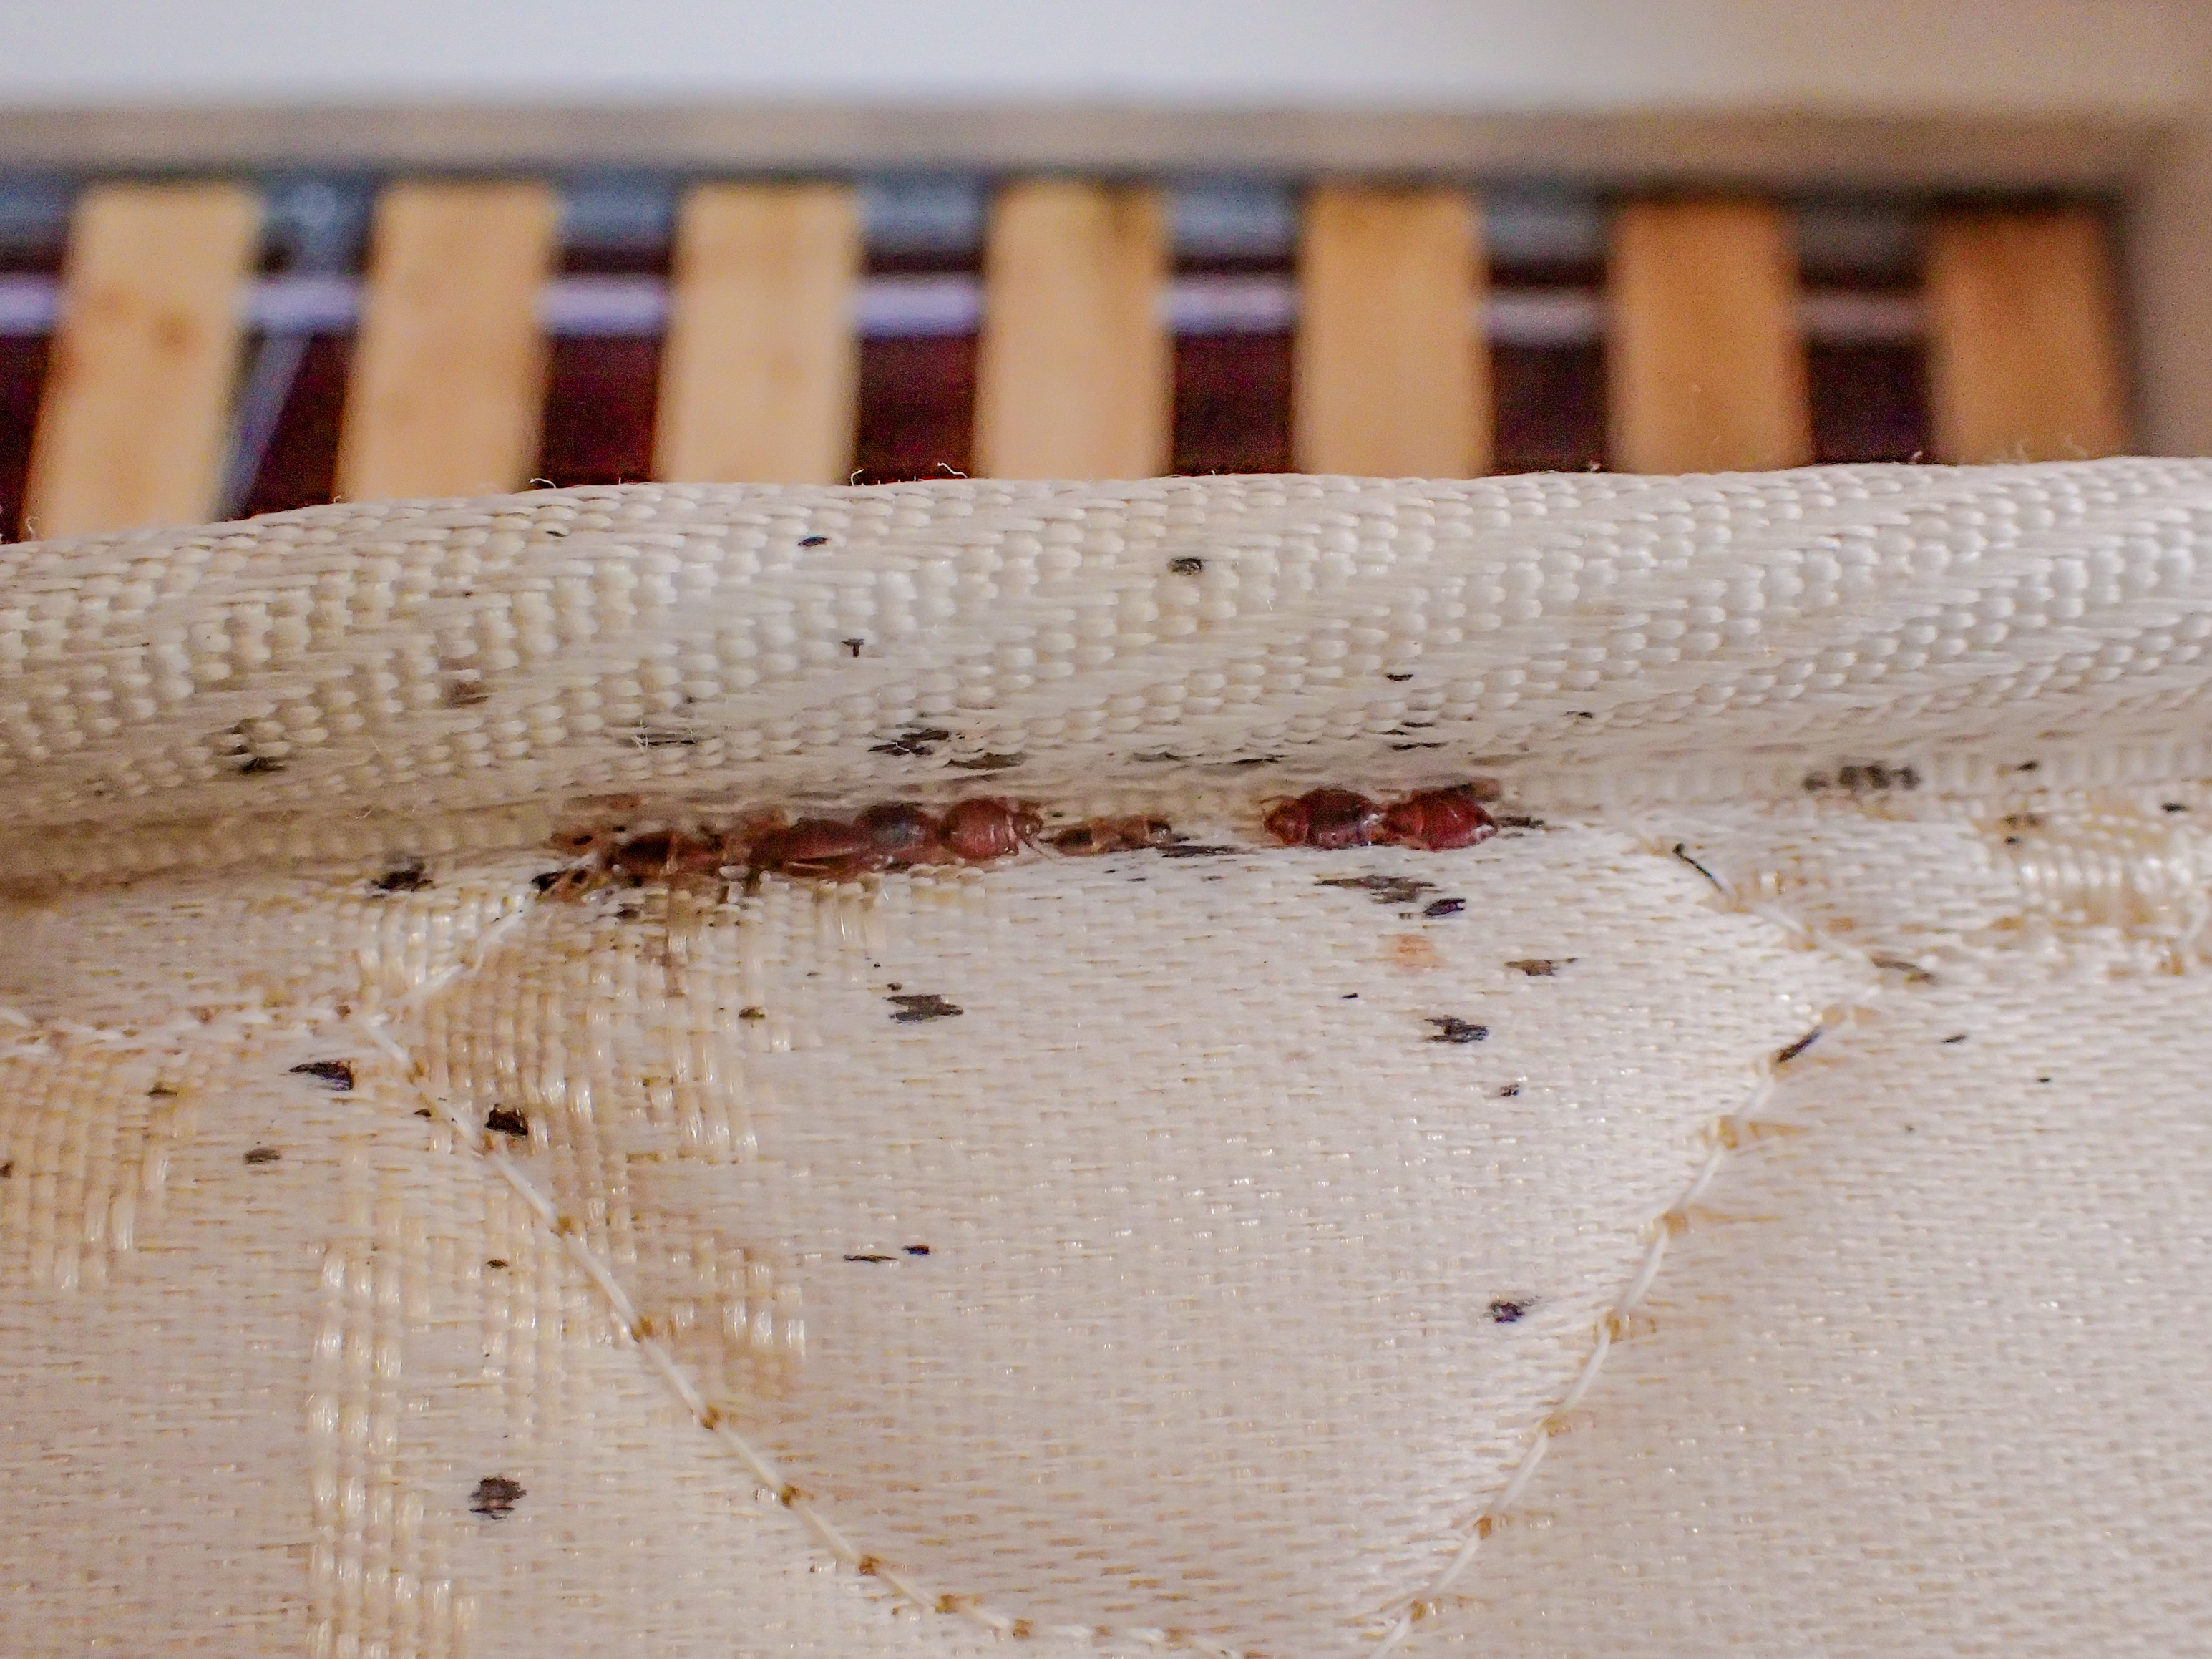 bed bug stains from inside mattress encasement